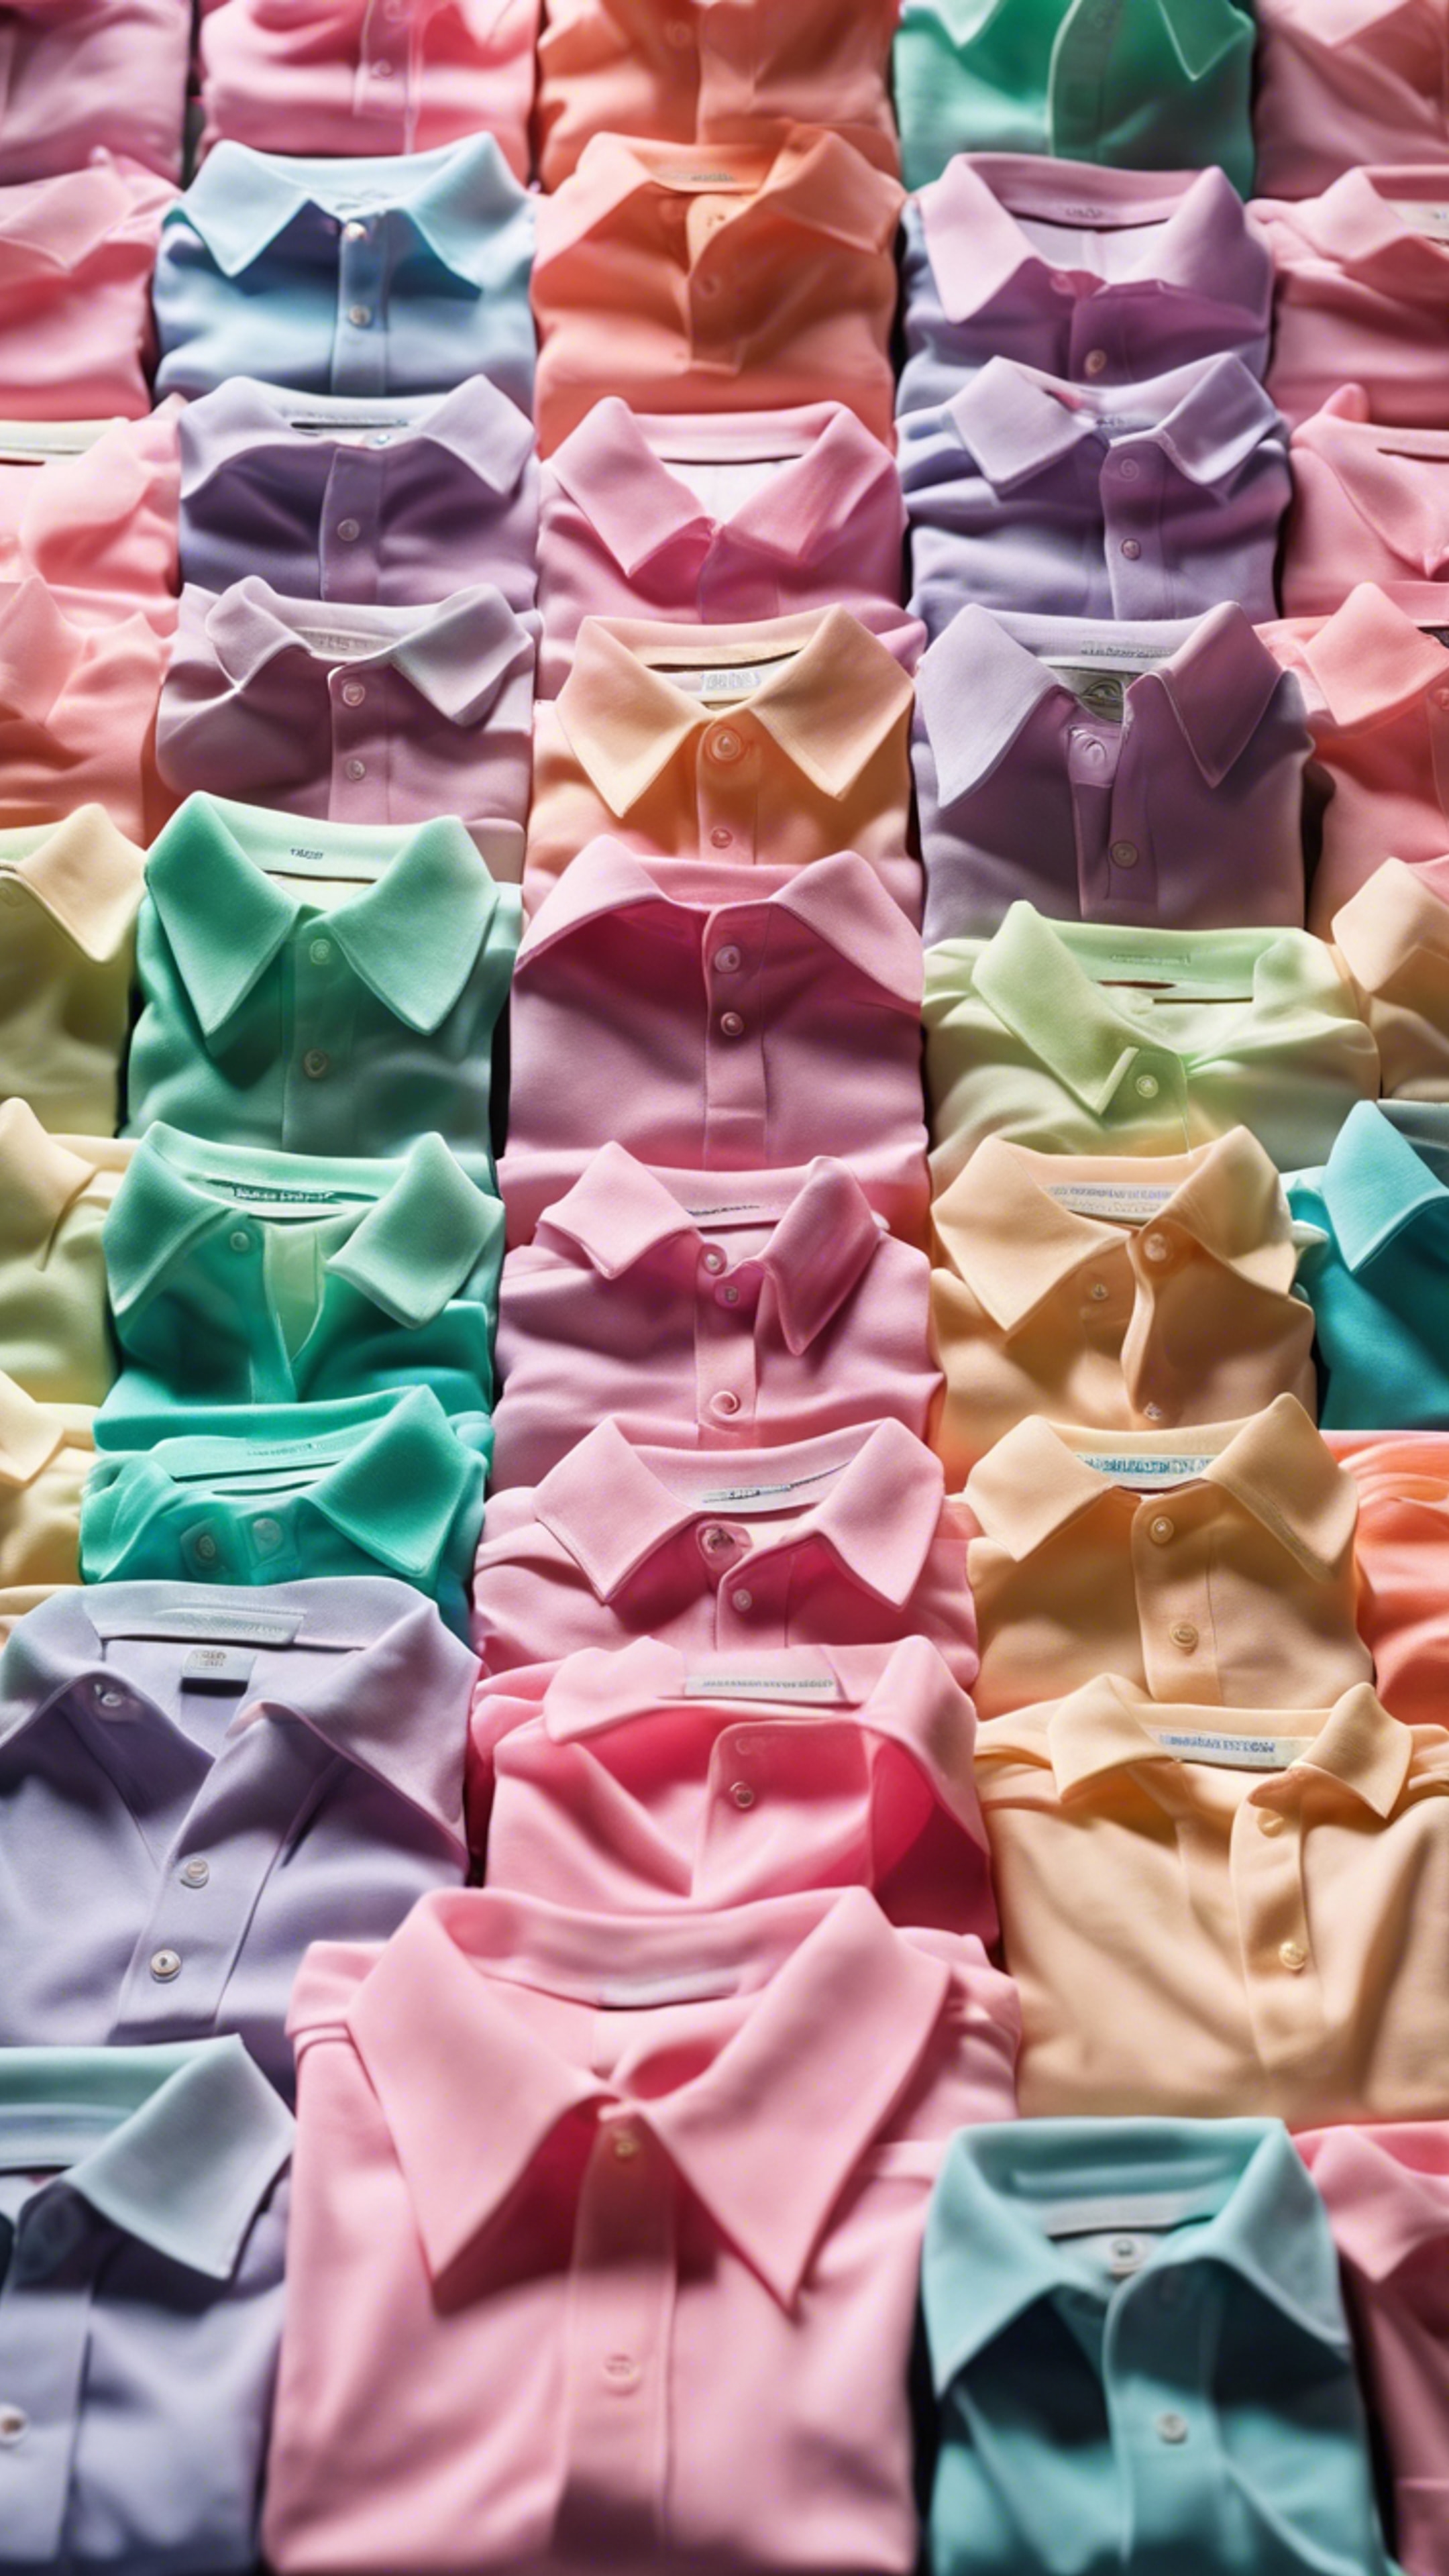 An array of neon pastel polos neatly arranged in a preppy boutique. Tapeta[90c24010f8ed4e2d91c1]